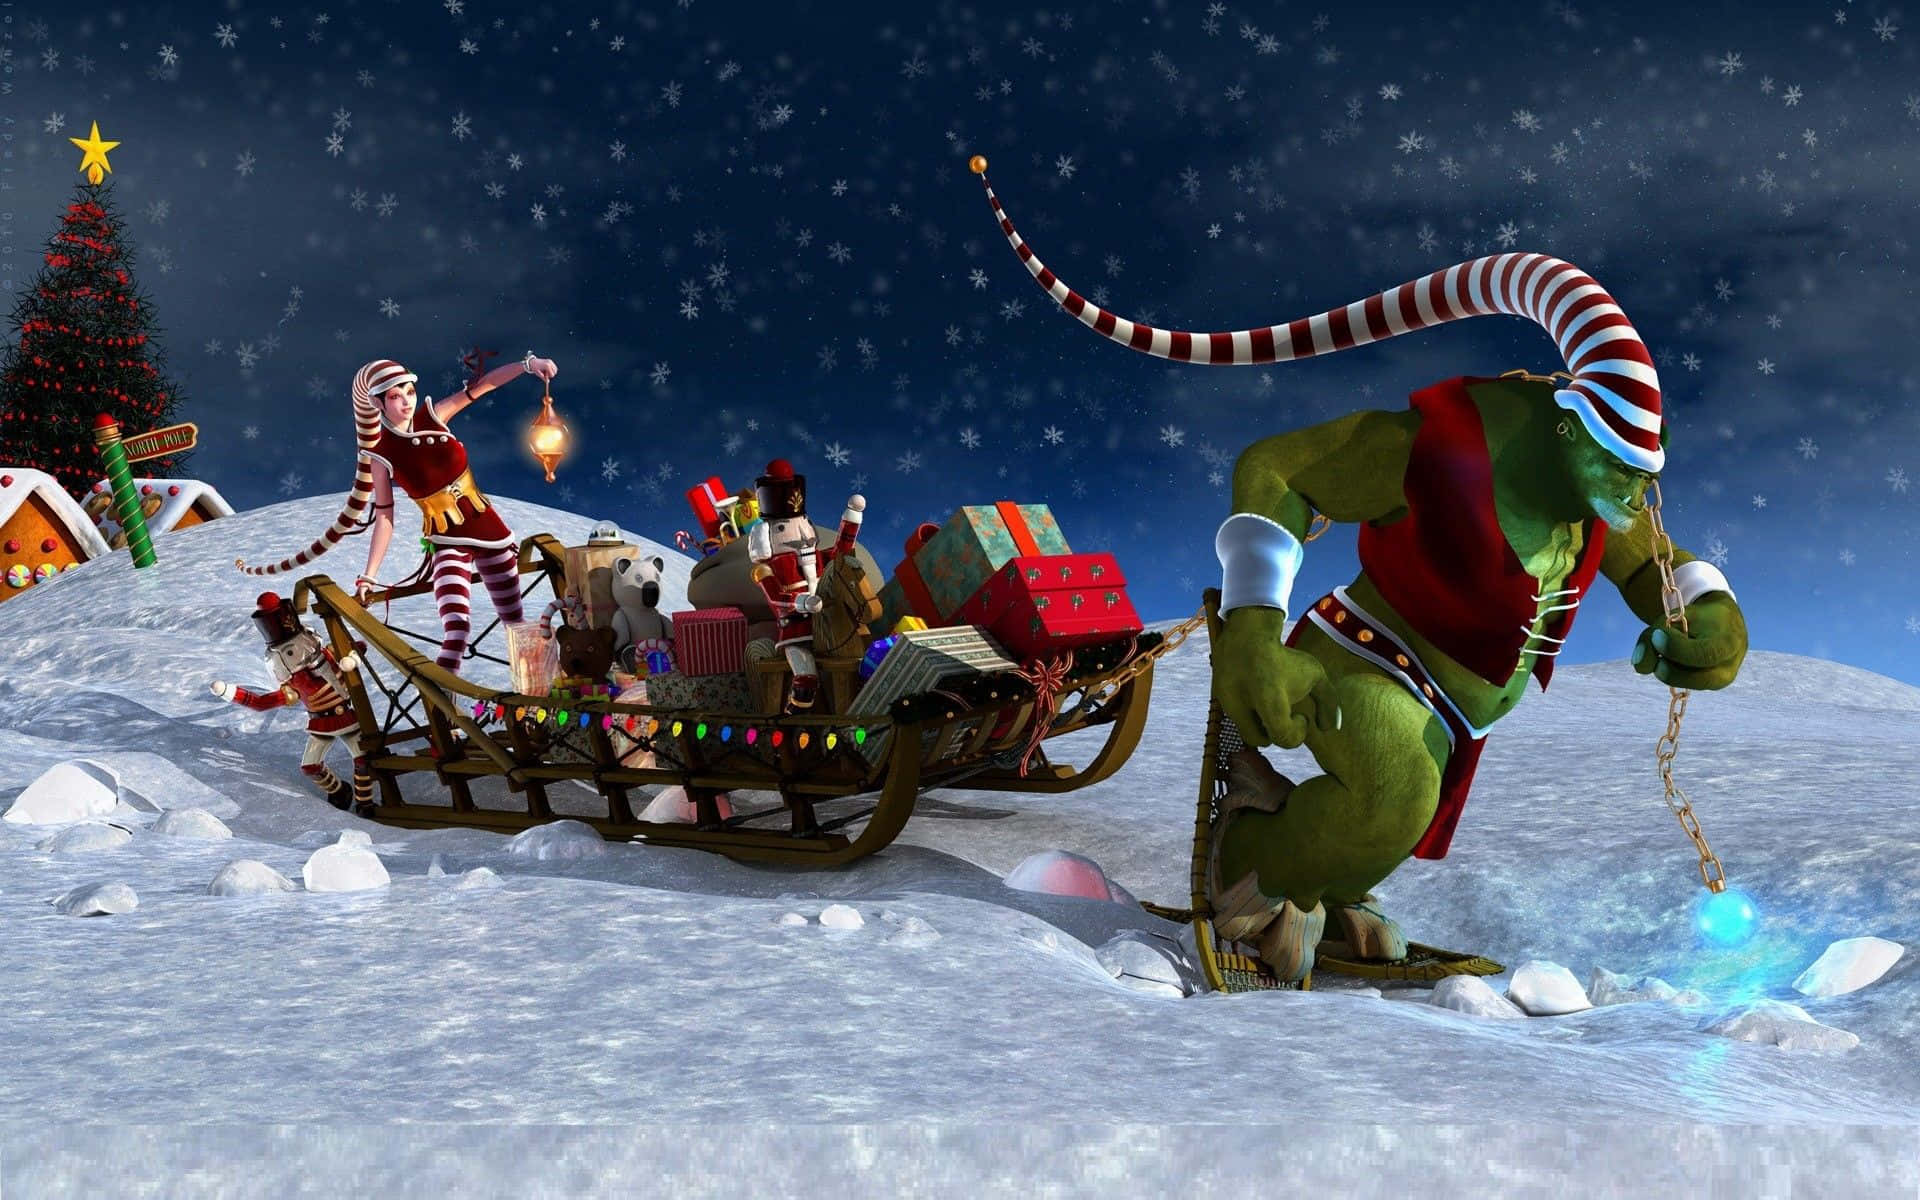 The Grinch has come to town for Christmas Wallpaper